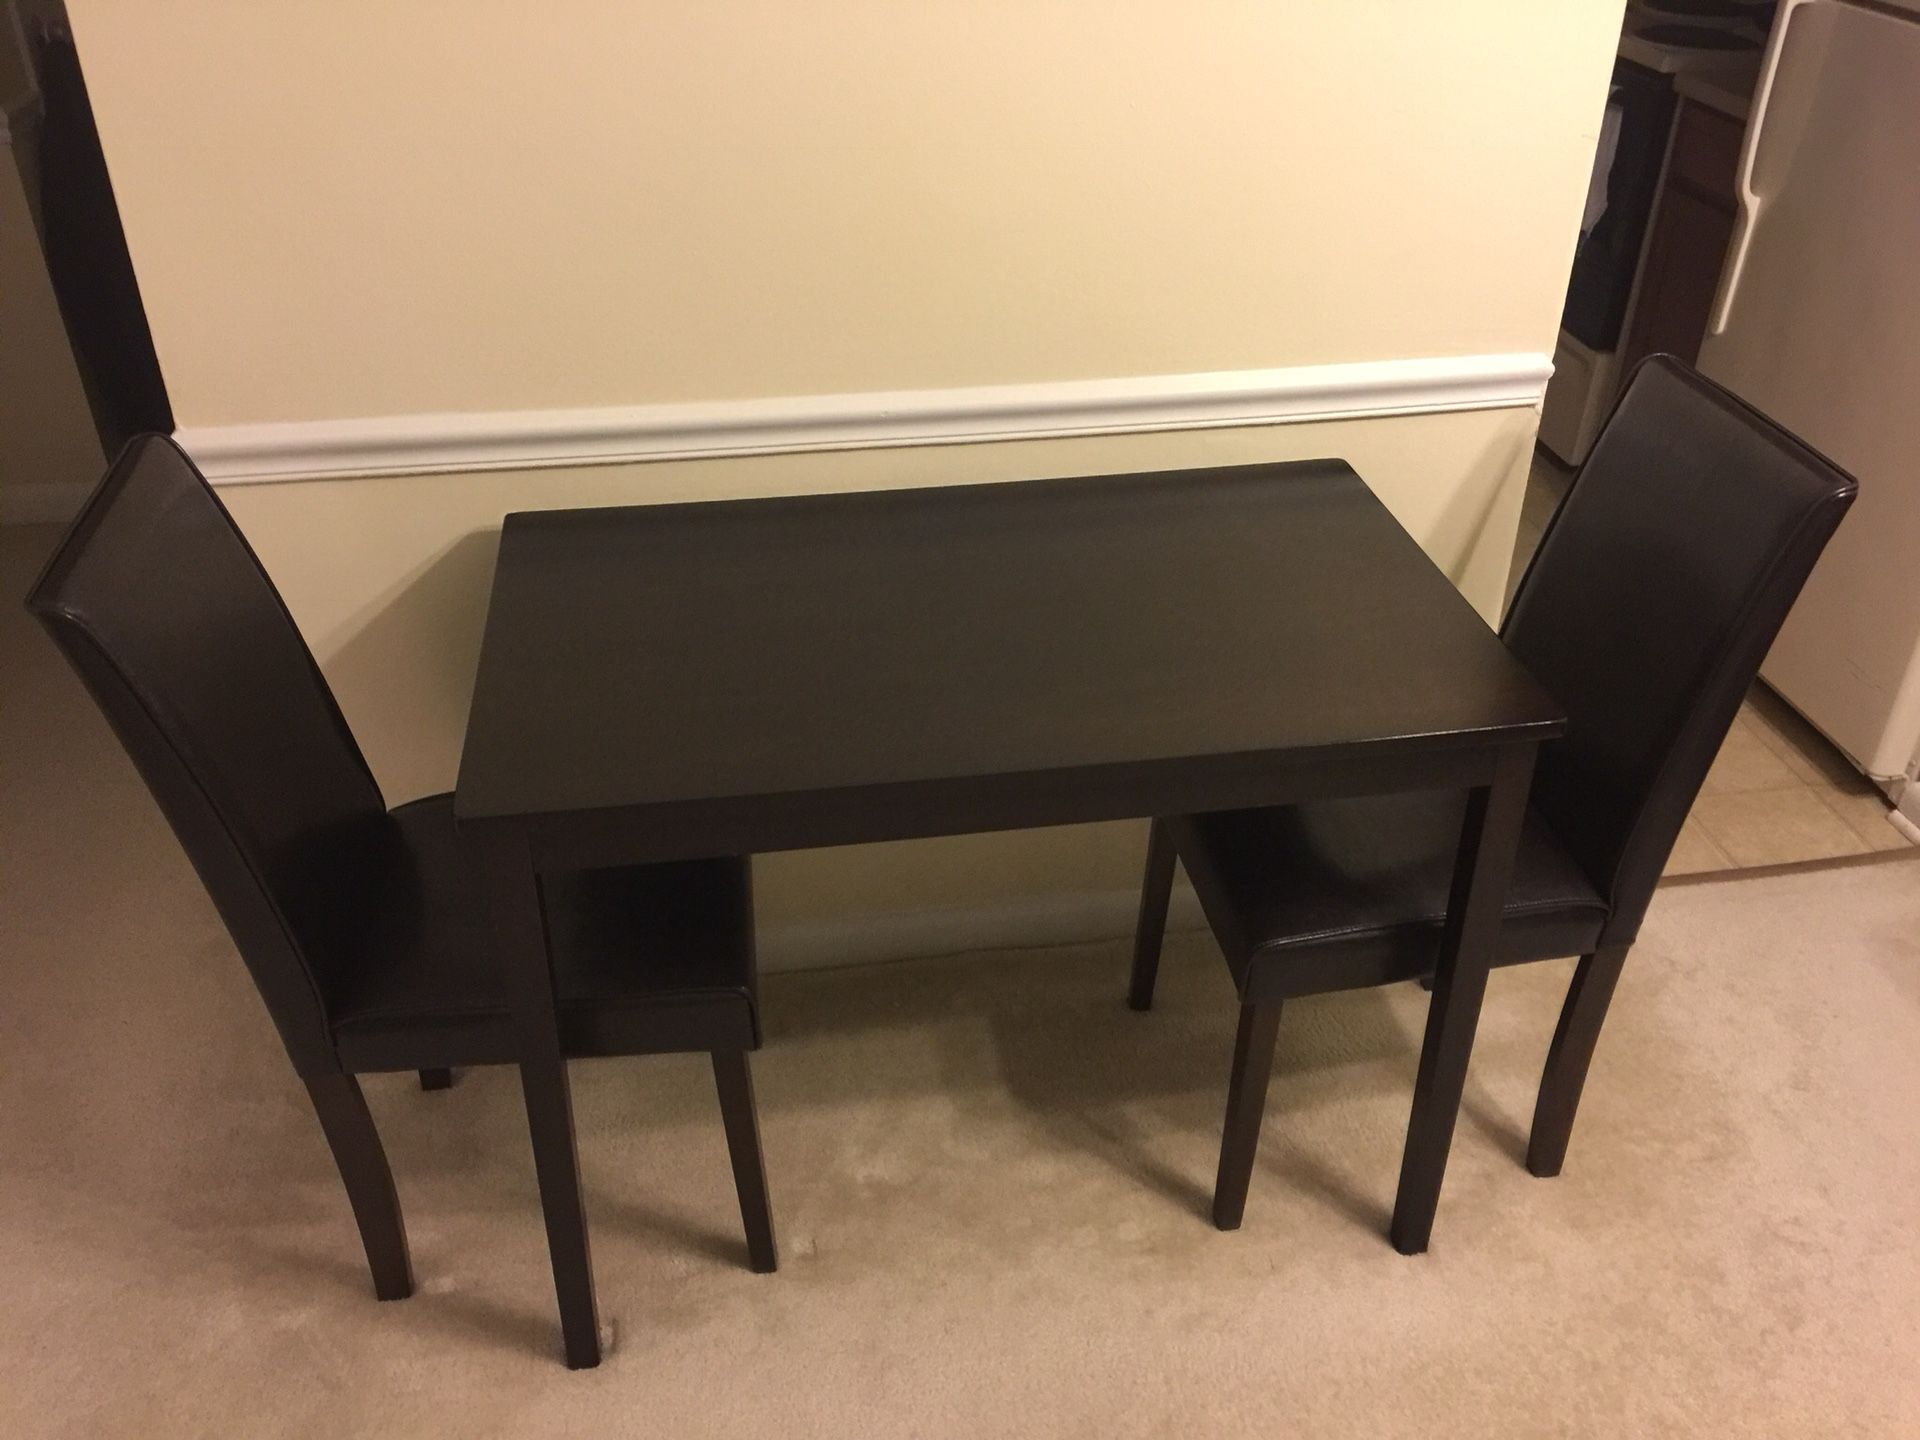 Dining table for 2 - great deal!